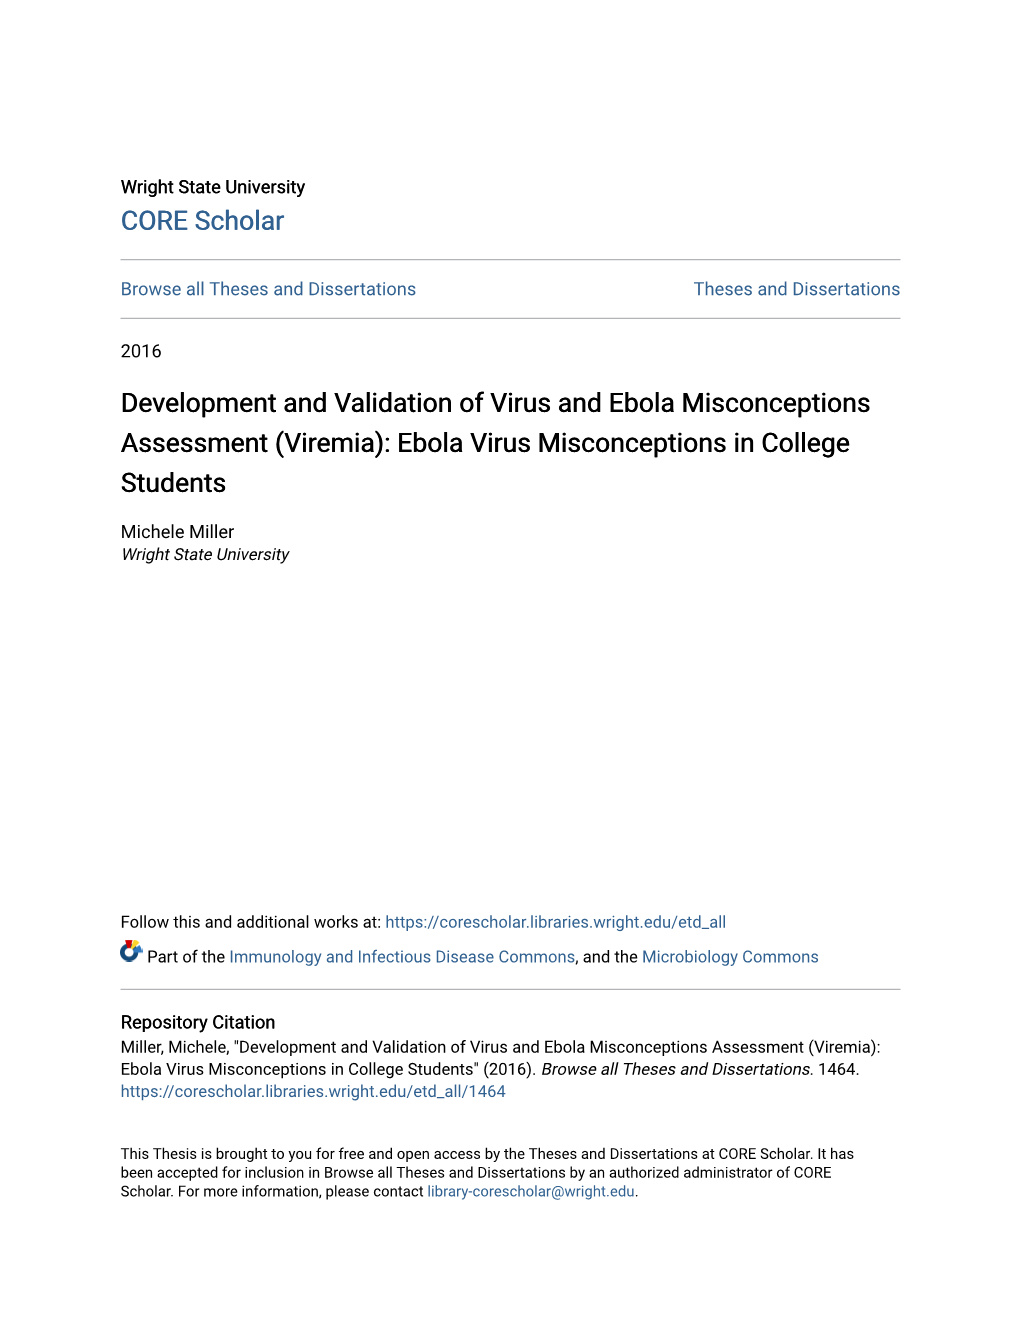 Ebola Virus Misconceptions in College Students